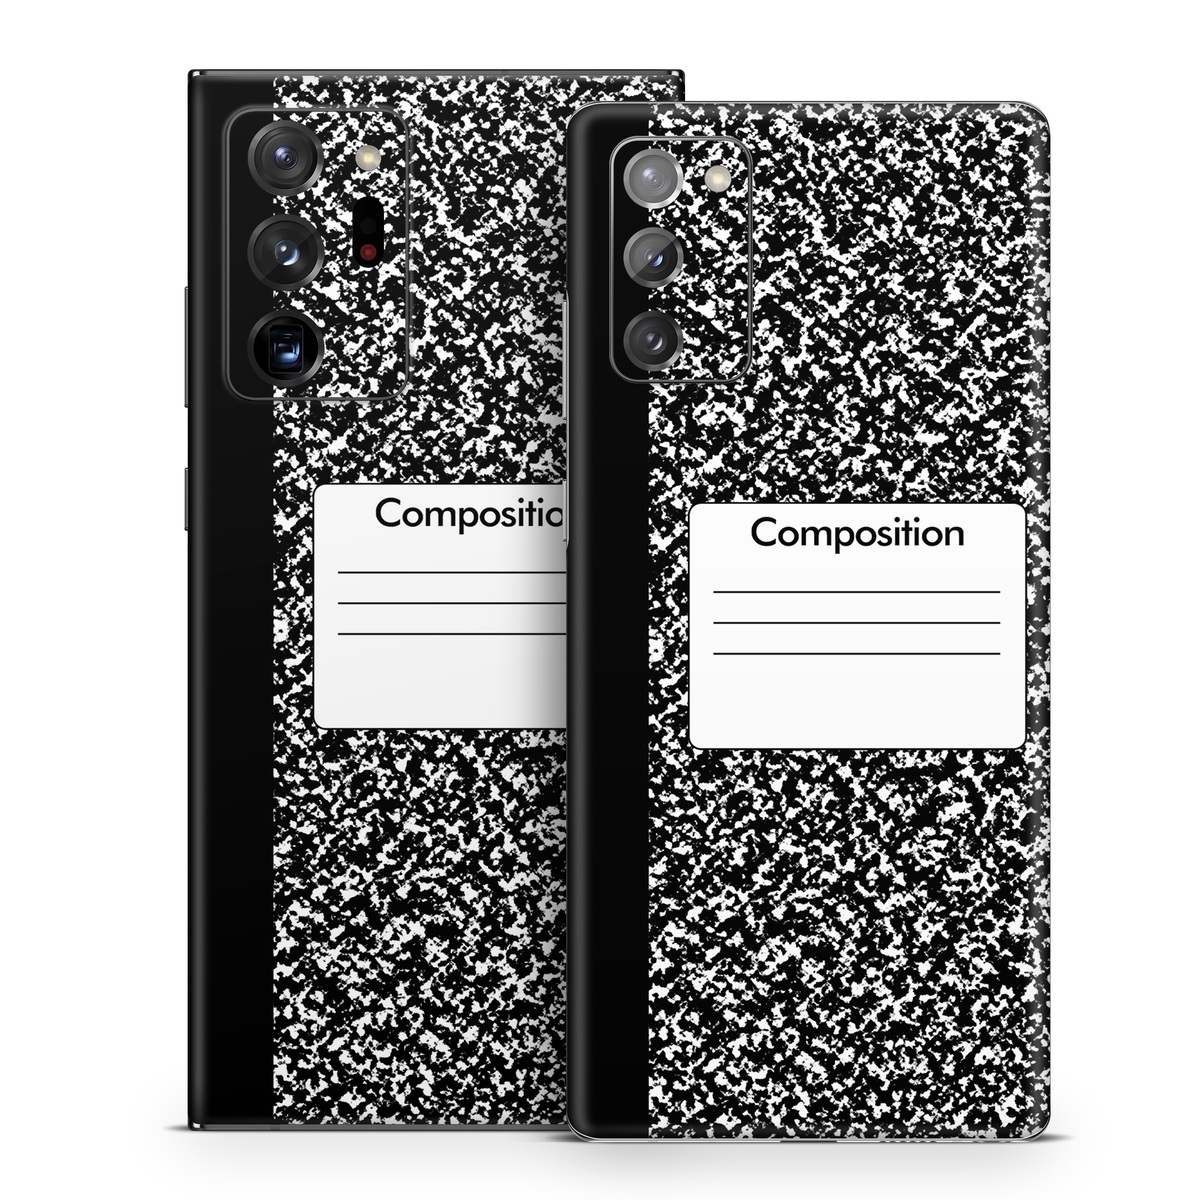 Samsung Galaxy Note 20 Skin design of Text, Font, Line, Pattern, Black-and-white, Illustration with black, gray, white colors